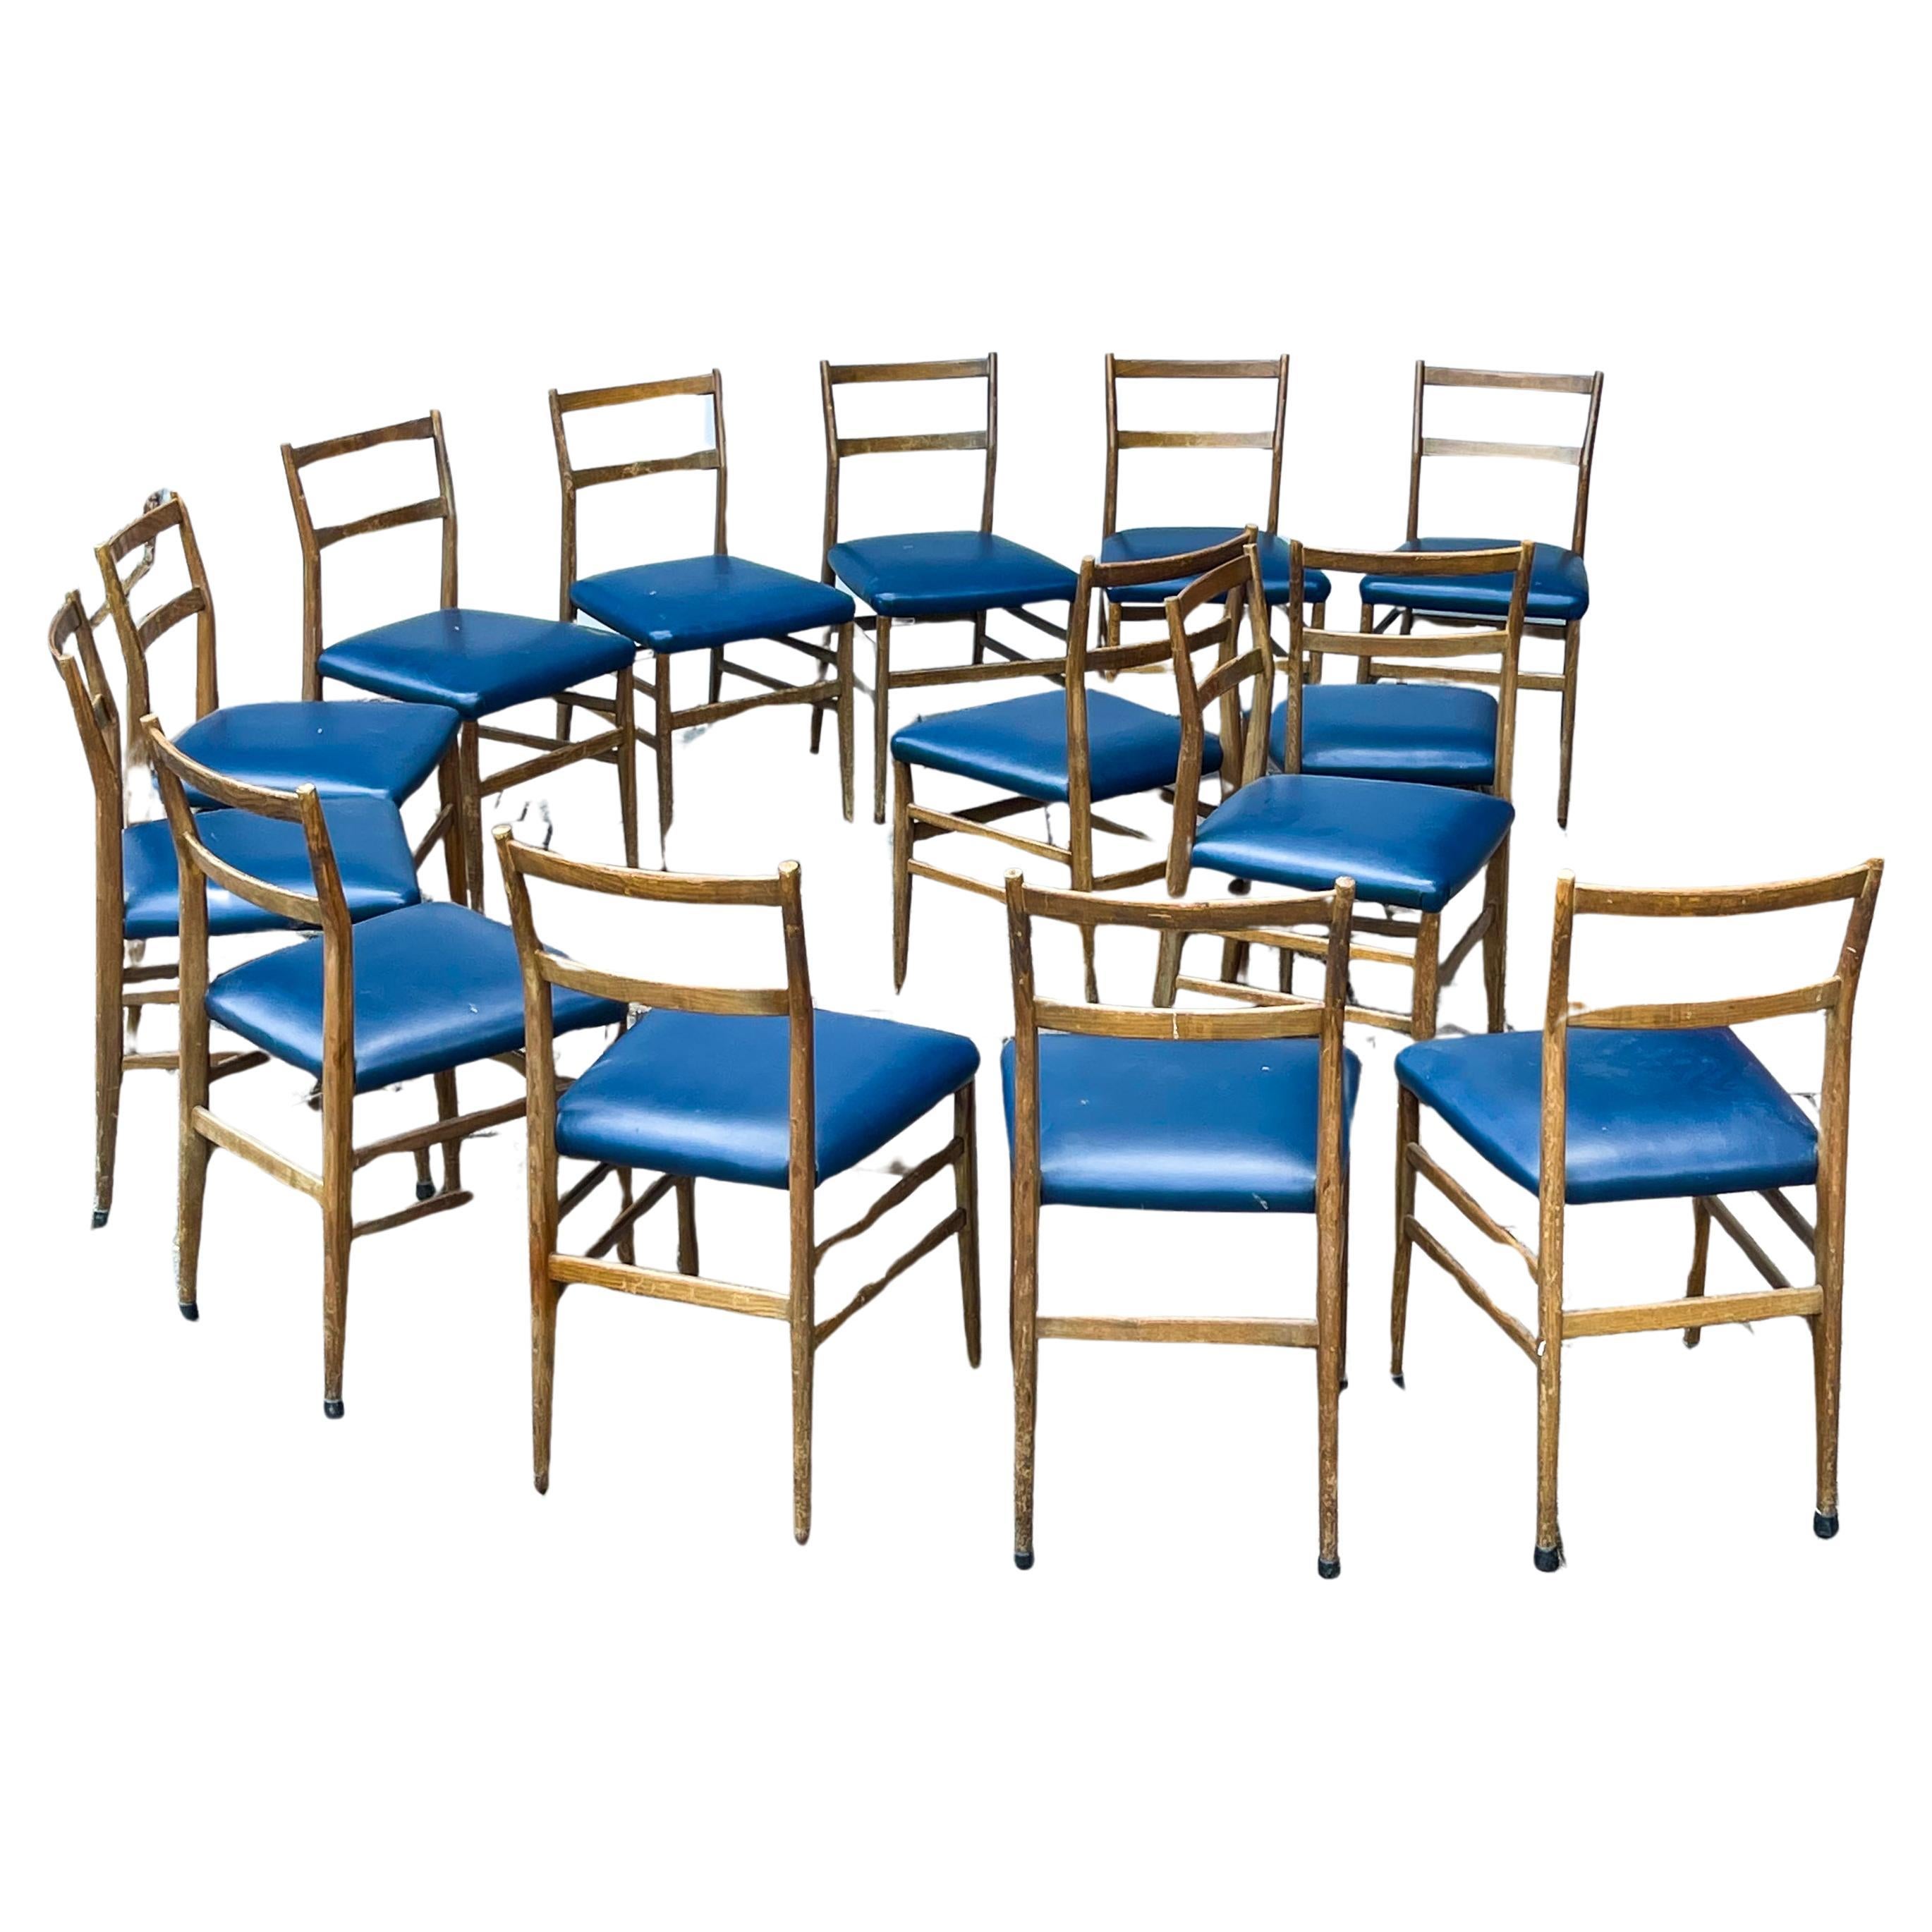 14 Mid Century Italian Dining Chairs, By Gio Ponti - Wood And Blue Leather - 